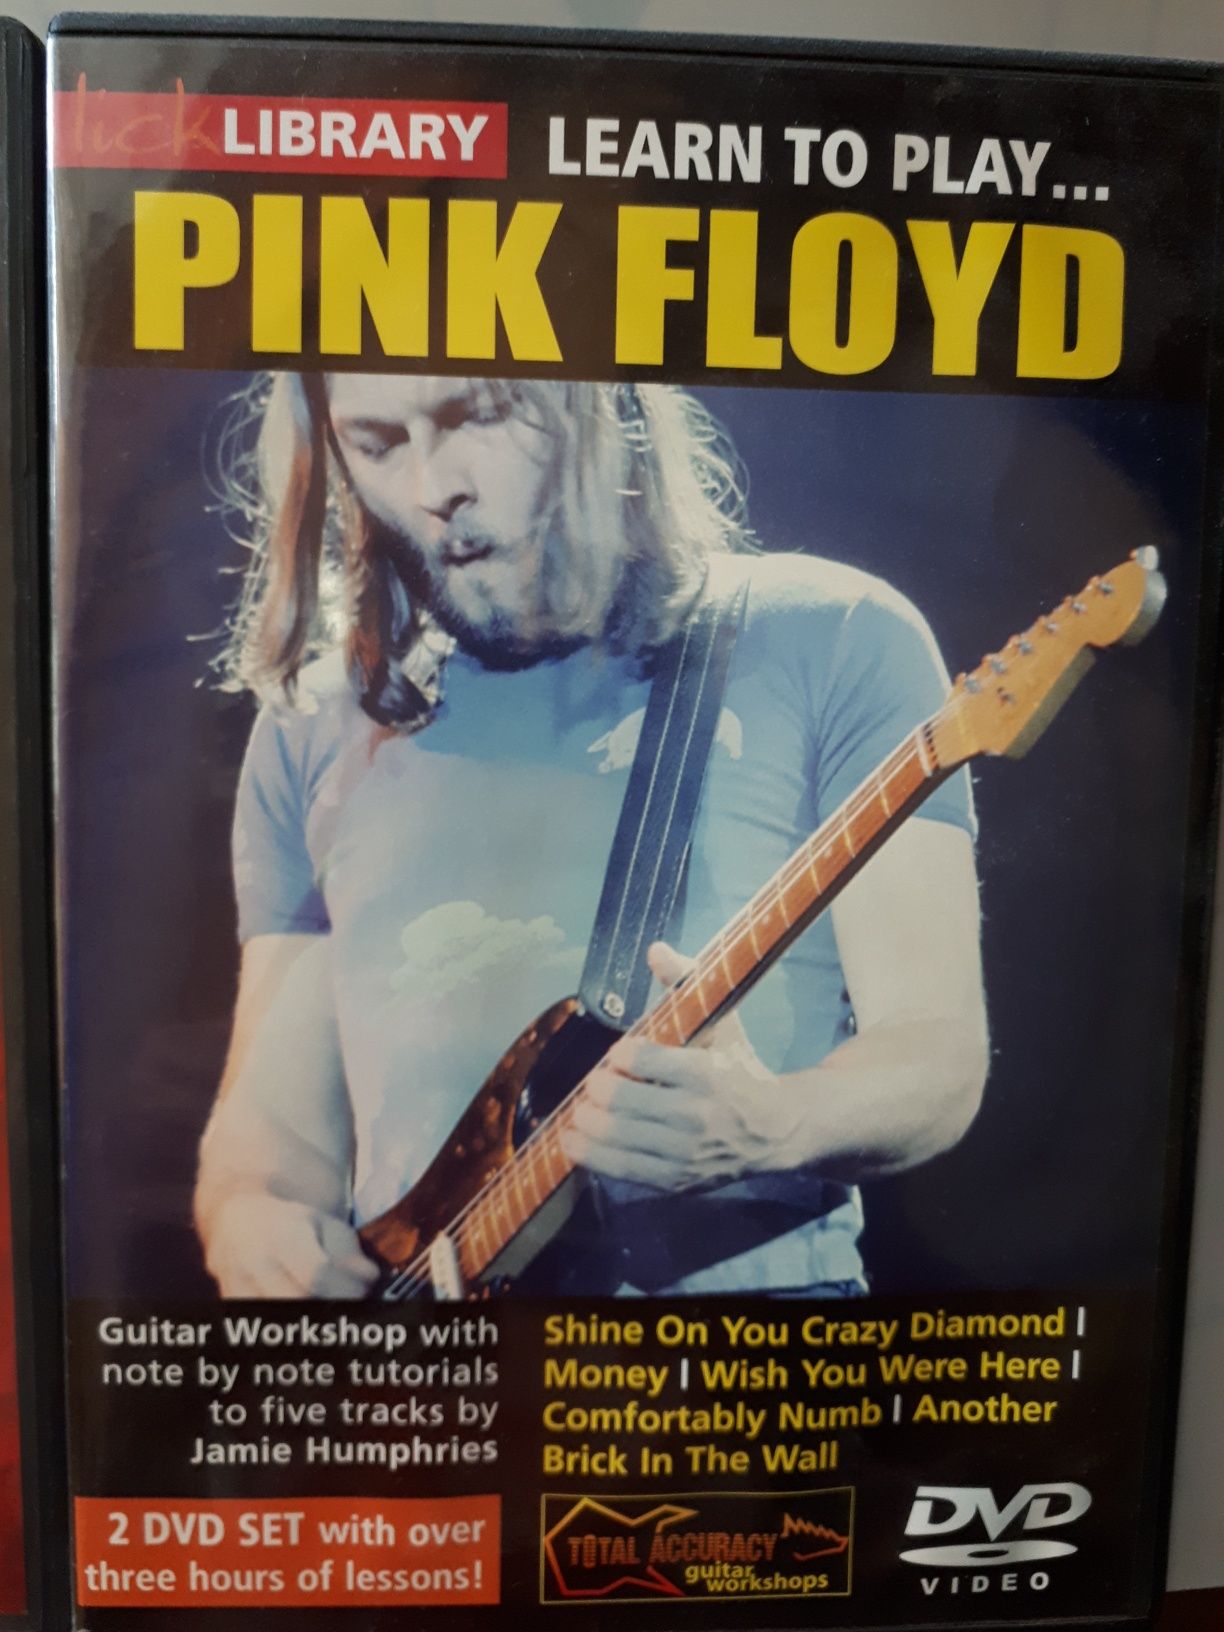 PINK FLOYD learn to play...